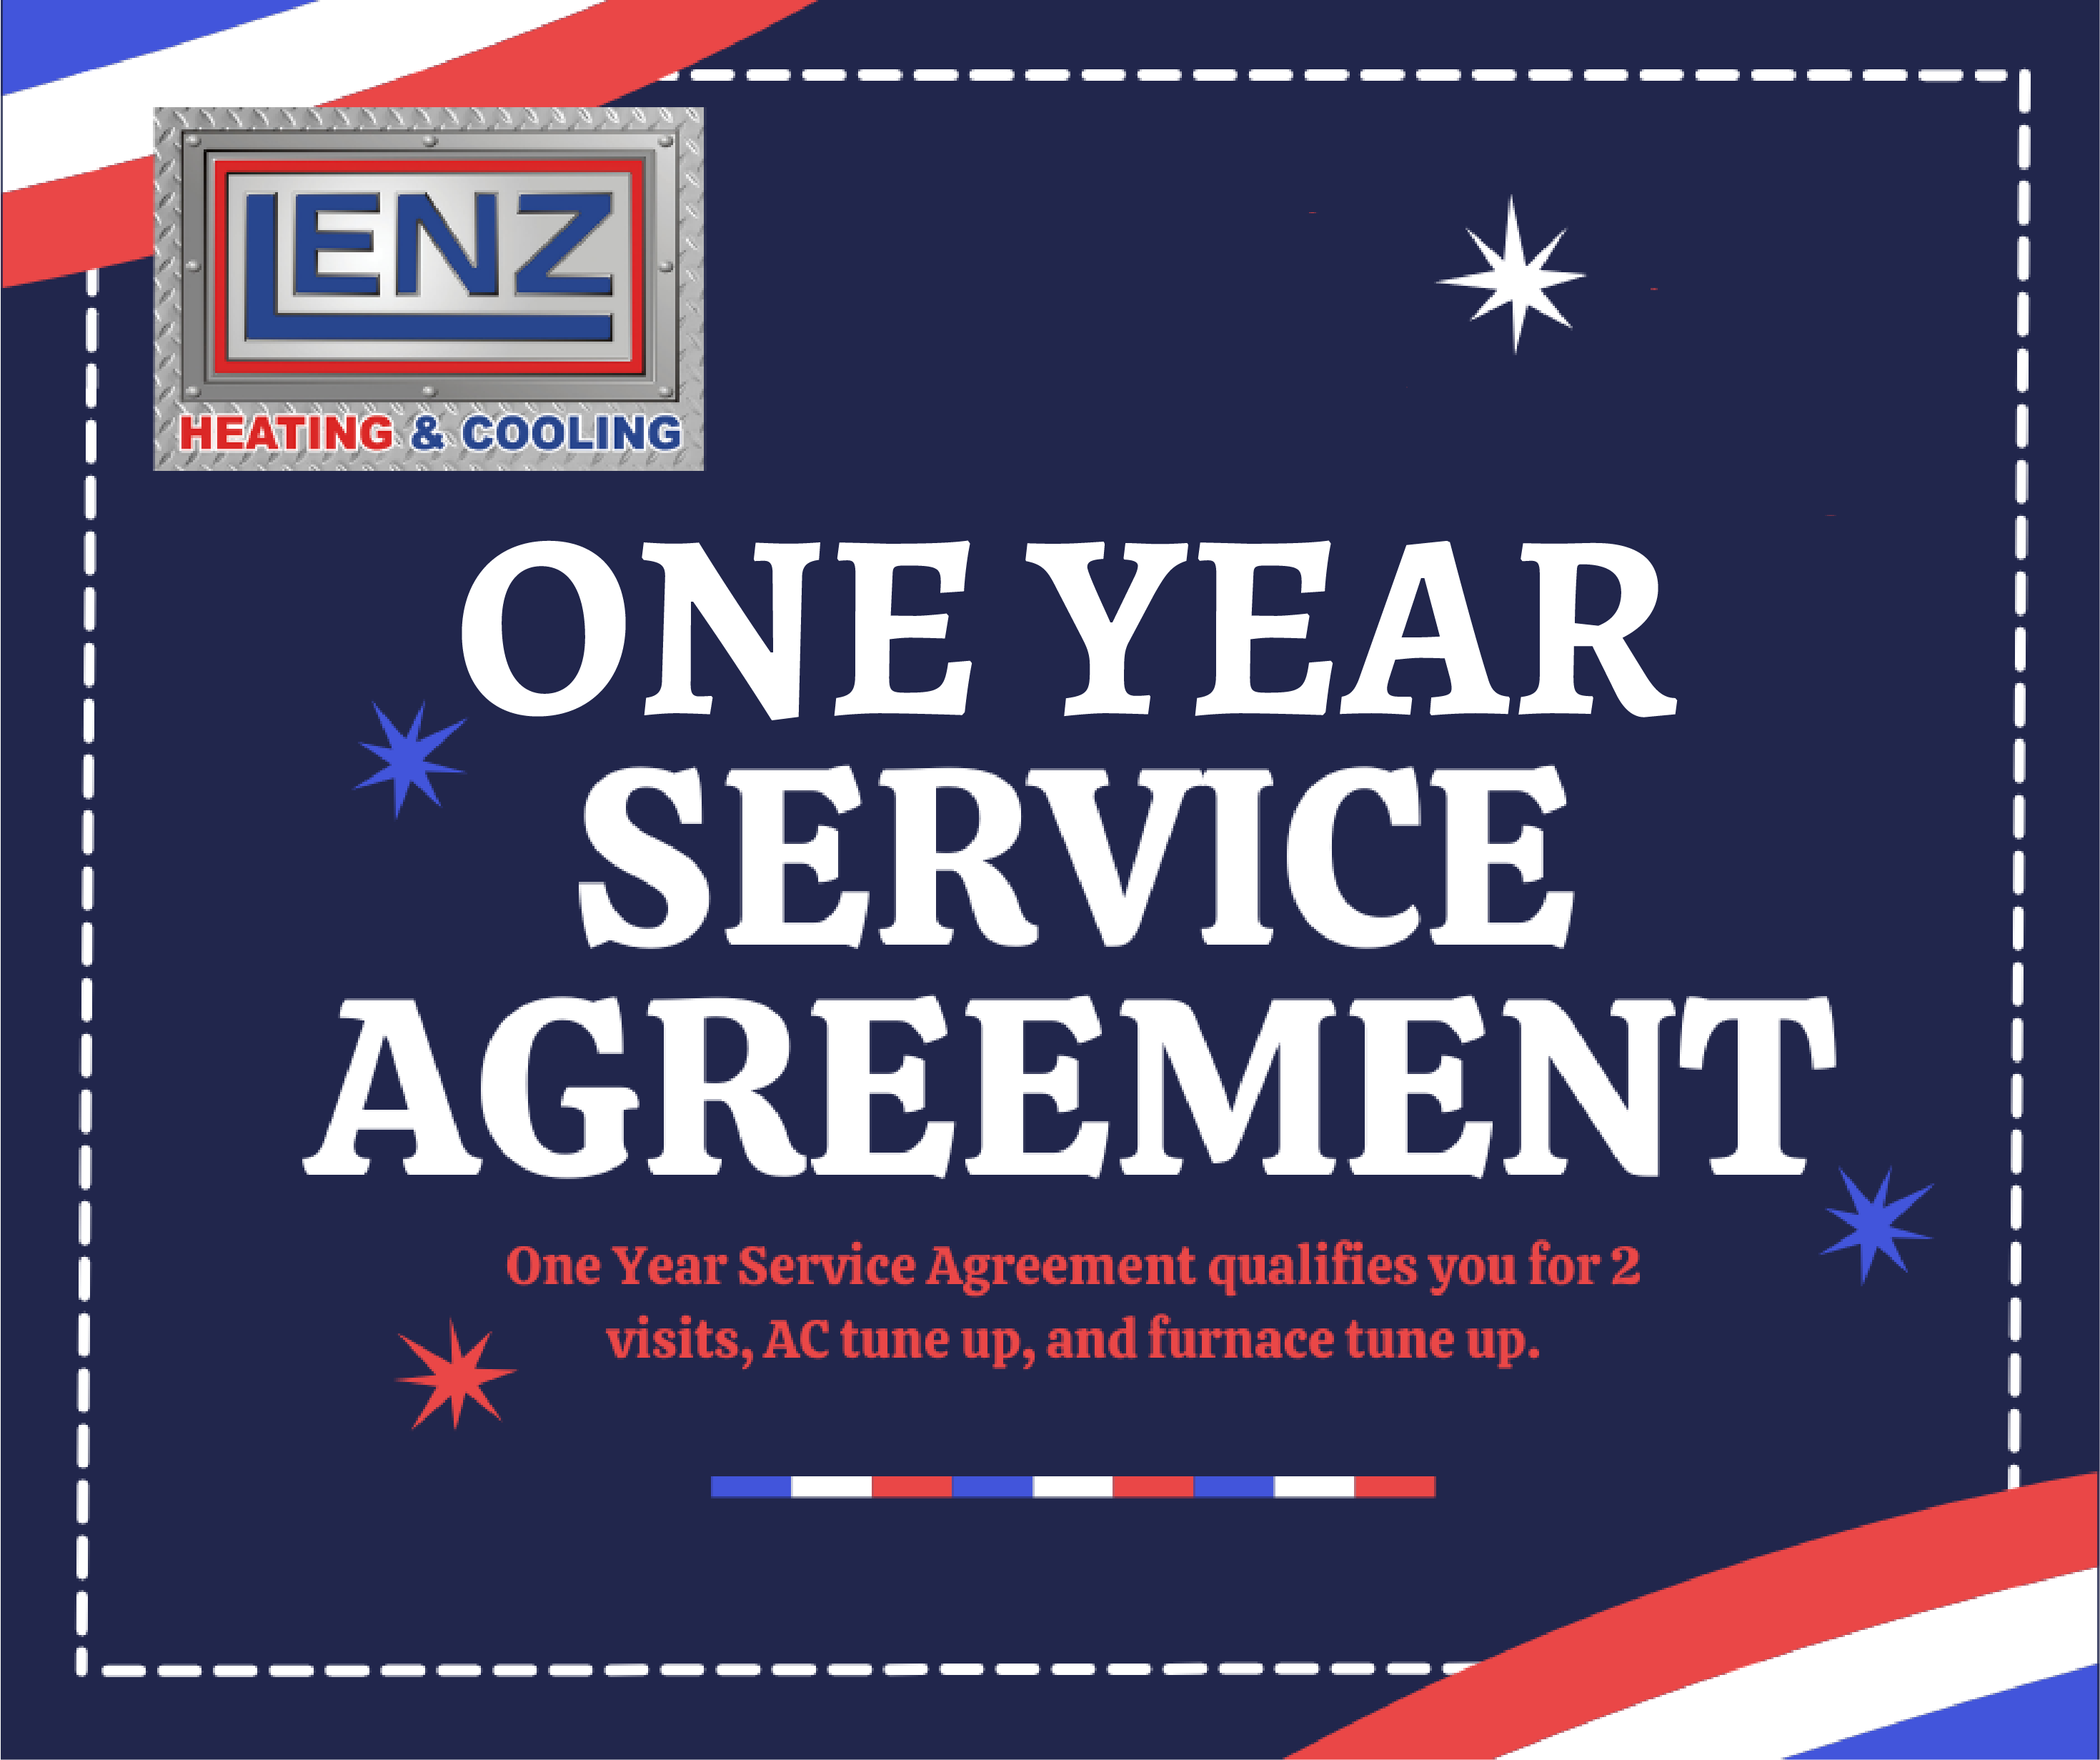 Service agreement - Lenz Heating & Cooling